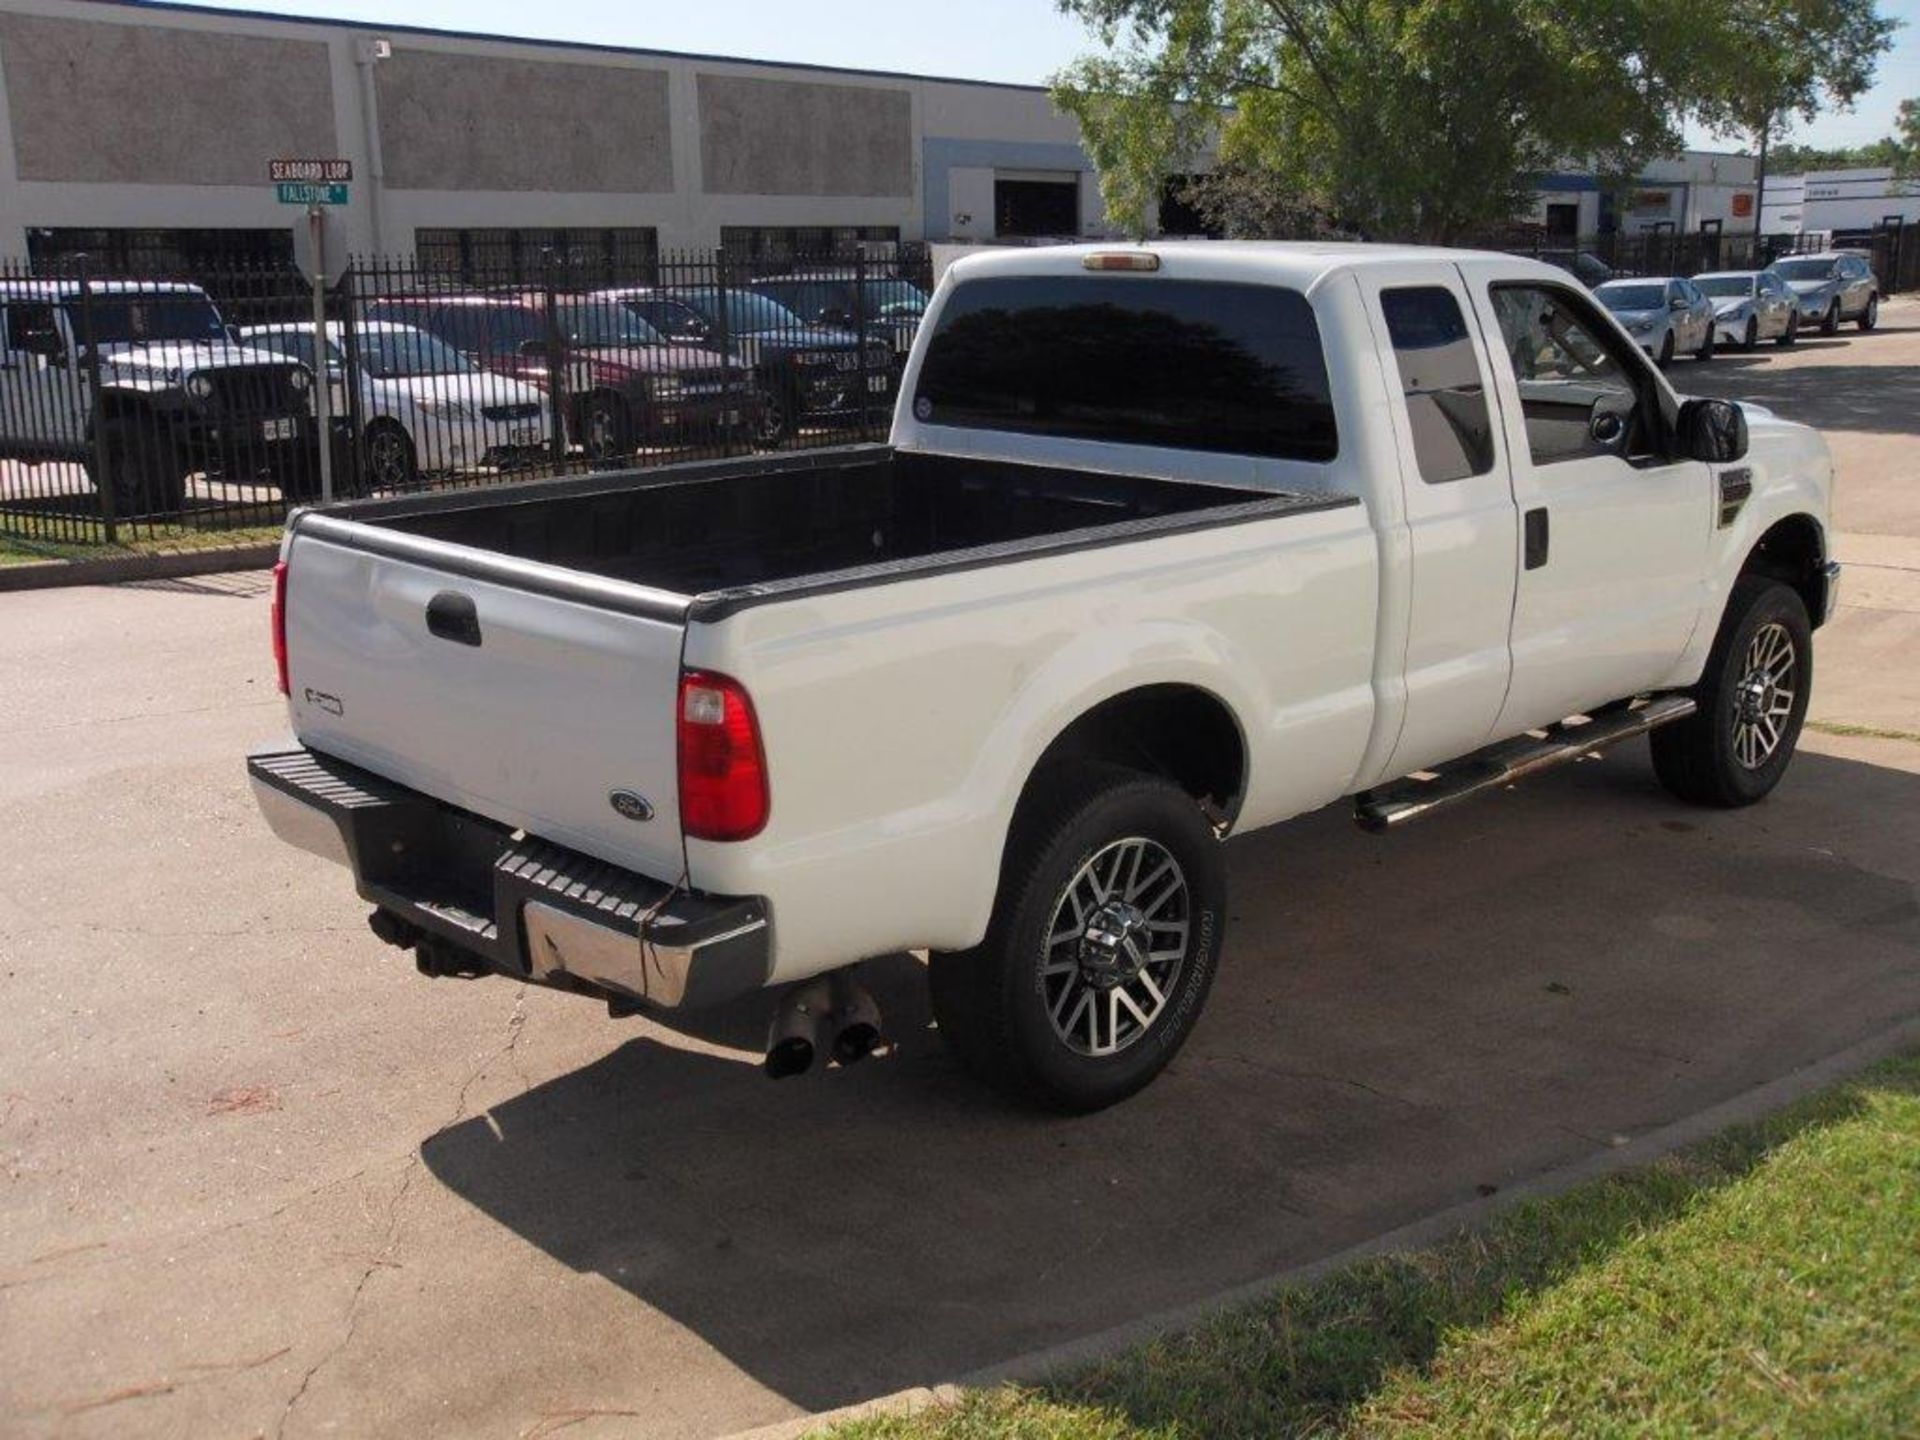 2008 Ford F250 XLT Super Duty Extended Cab Short Bed Pickup - Image 7 of 37